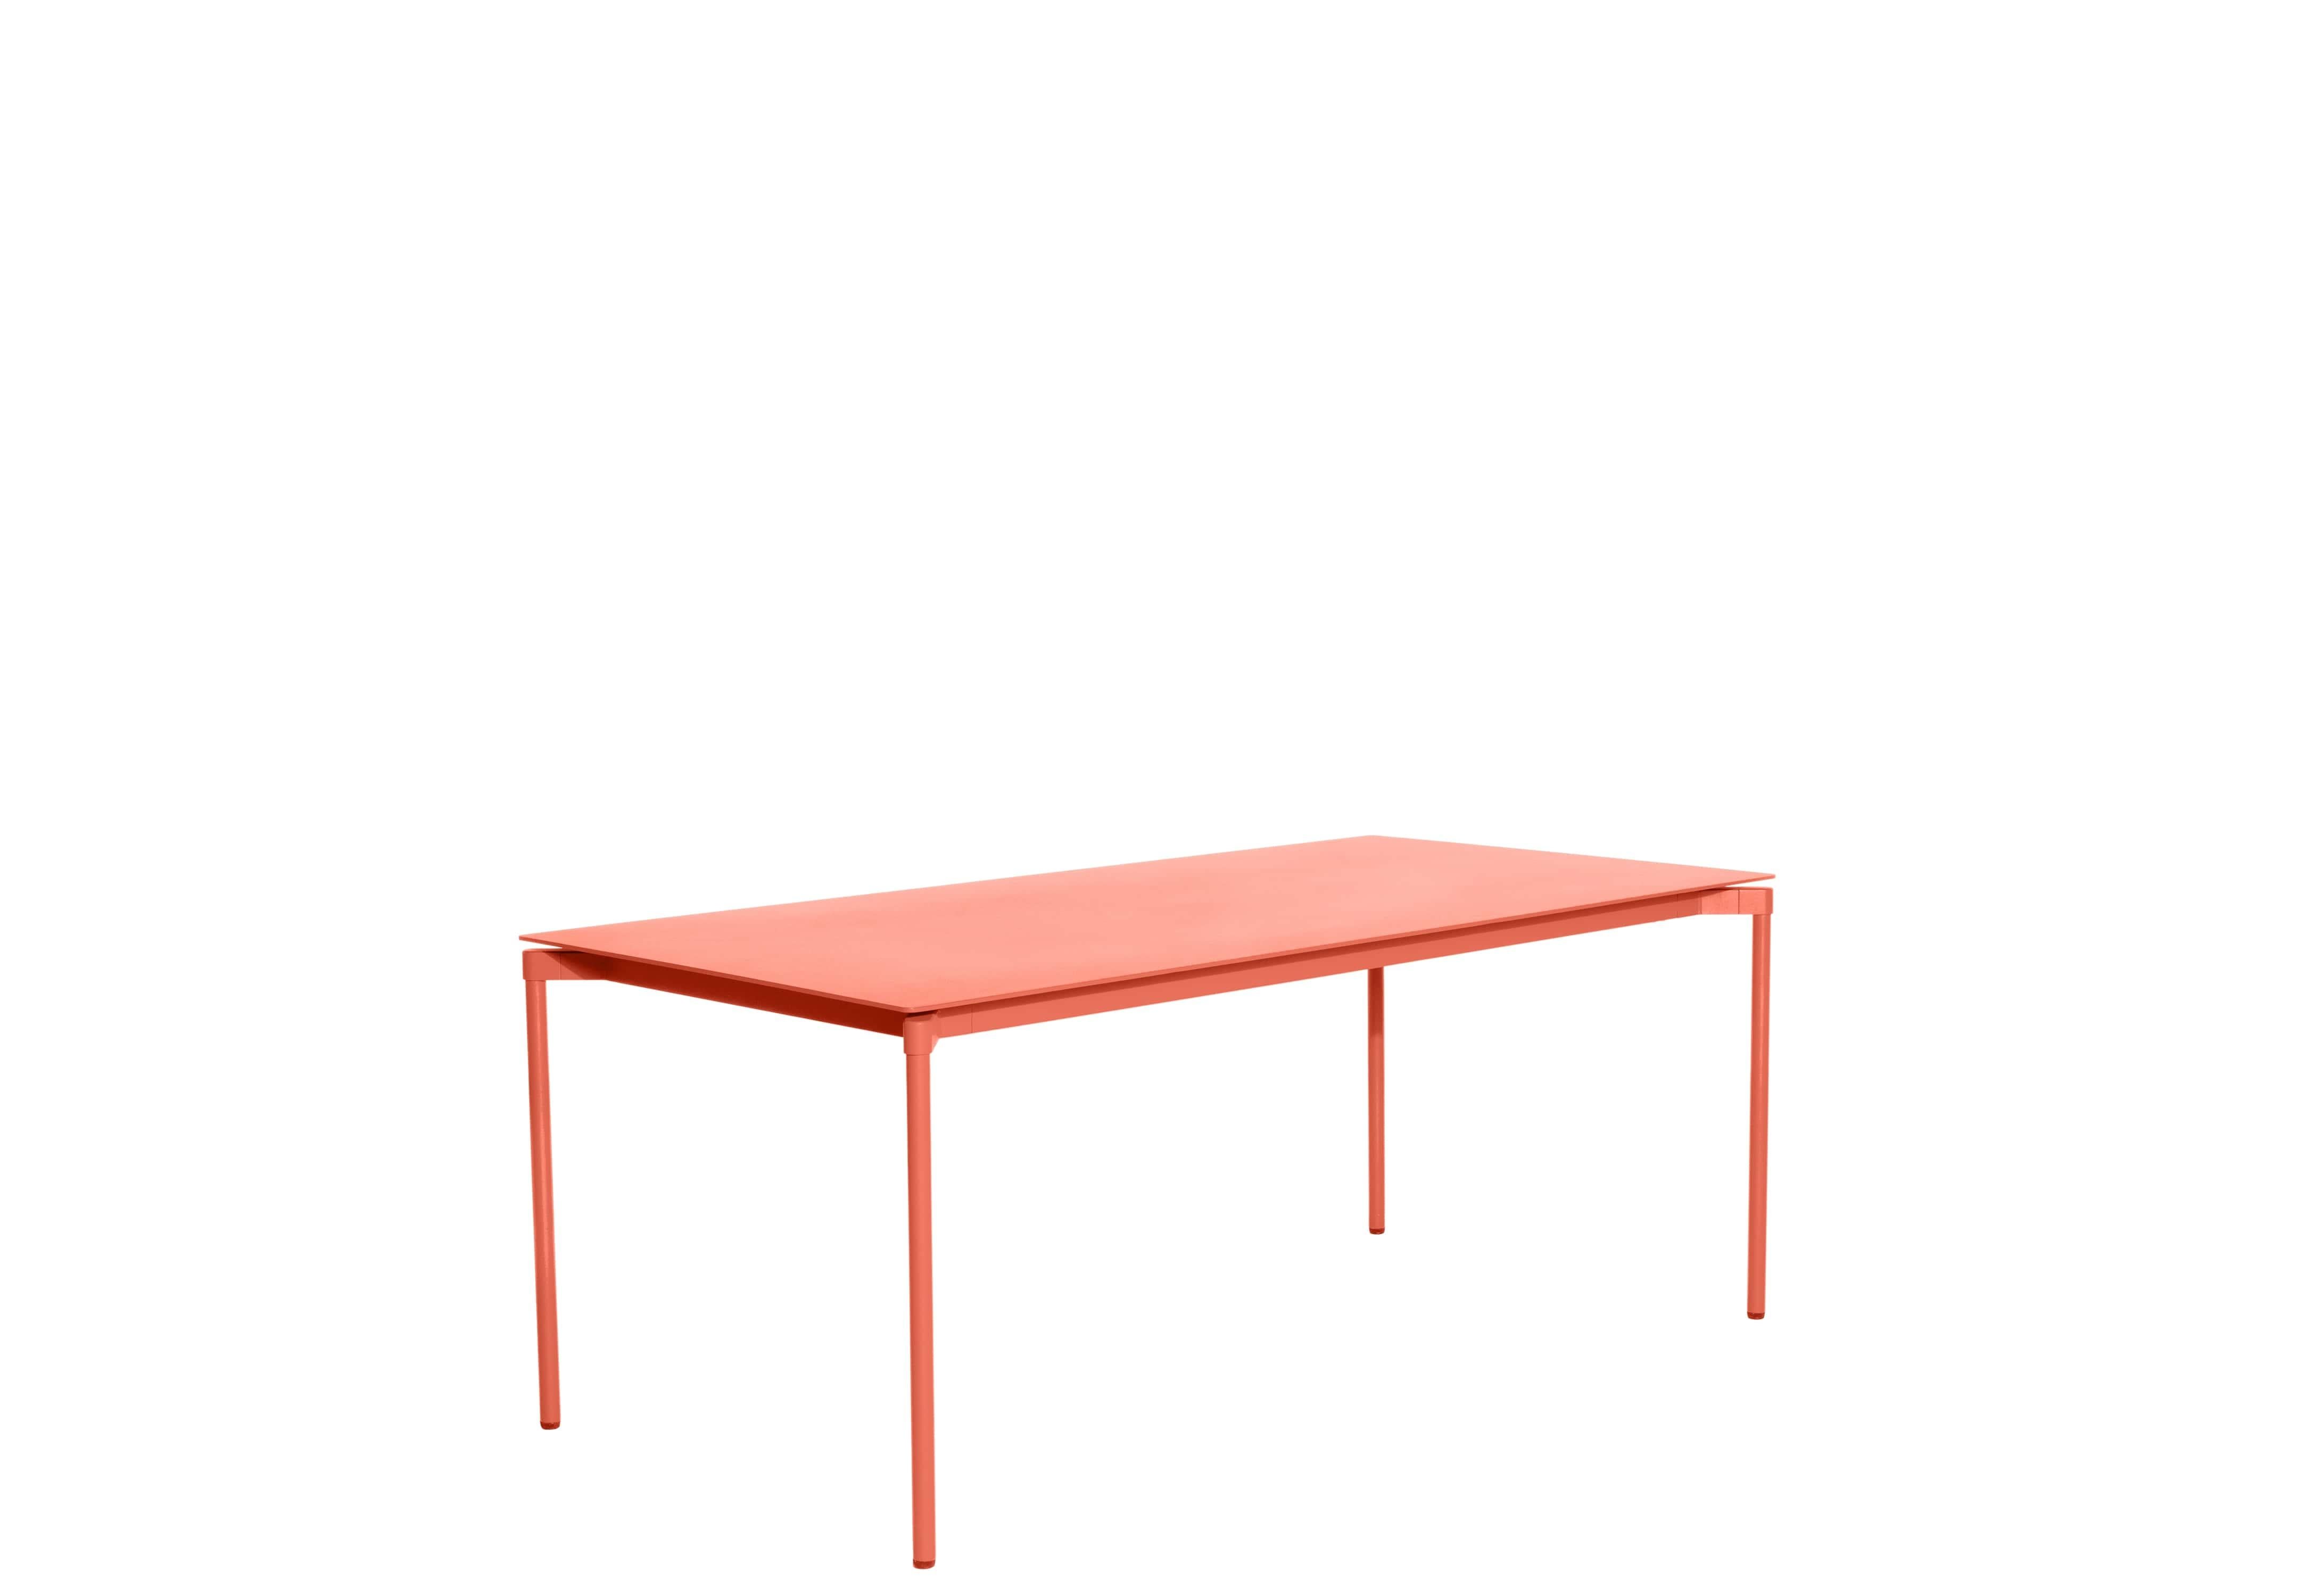 Petite Friture Fromme Rectangular Table in Coral Aluminium by Tom Chung, 2020

The Fromme collection stands out by its pure line and compact design. Absorbers placed under the seating gives a soft and very comfortable flexibility to seats. Made